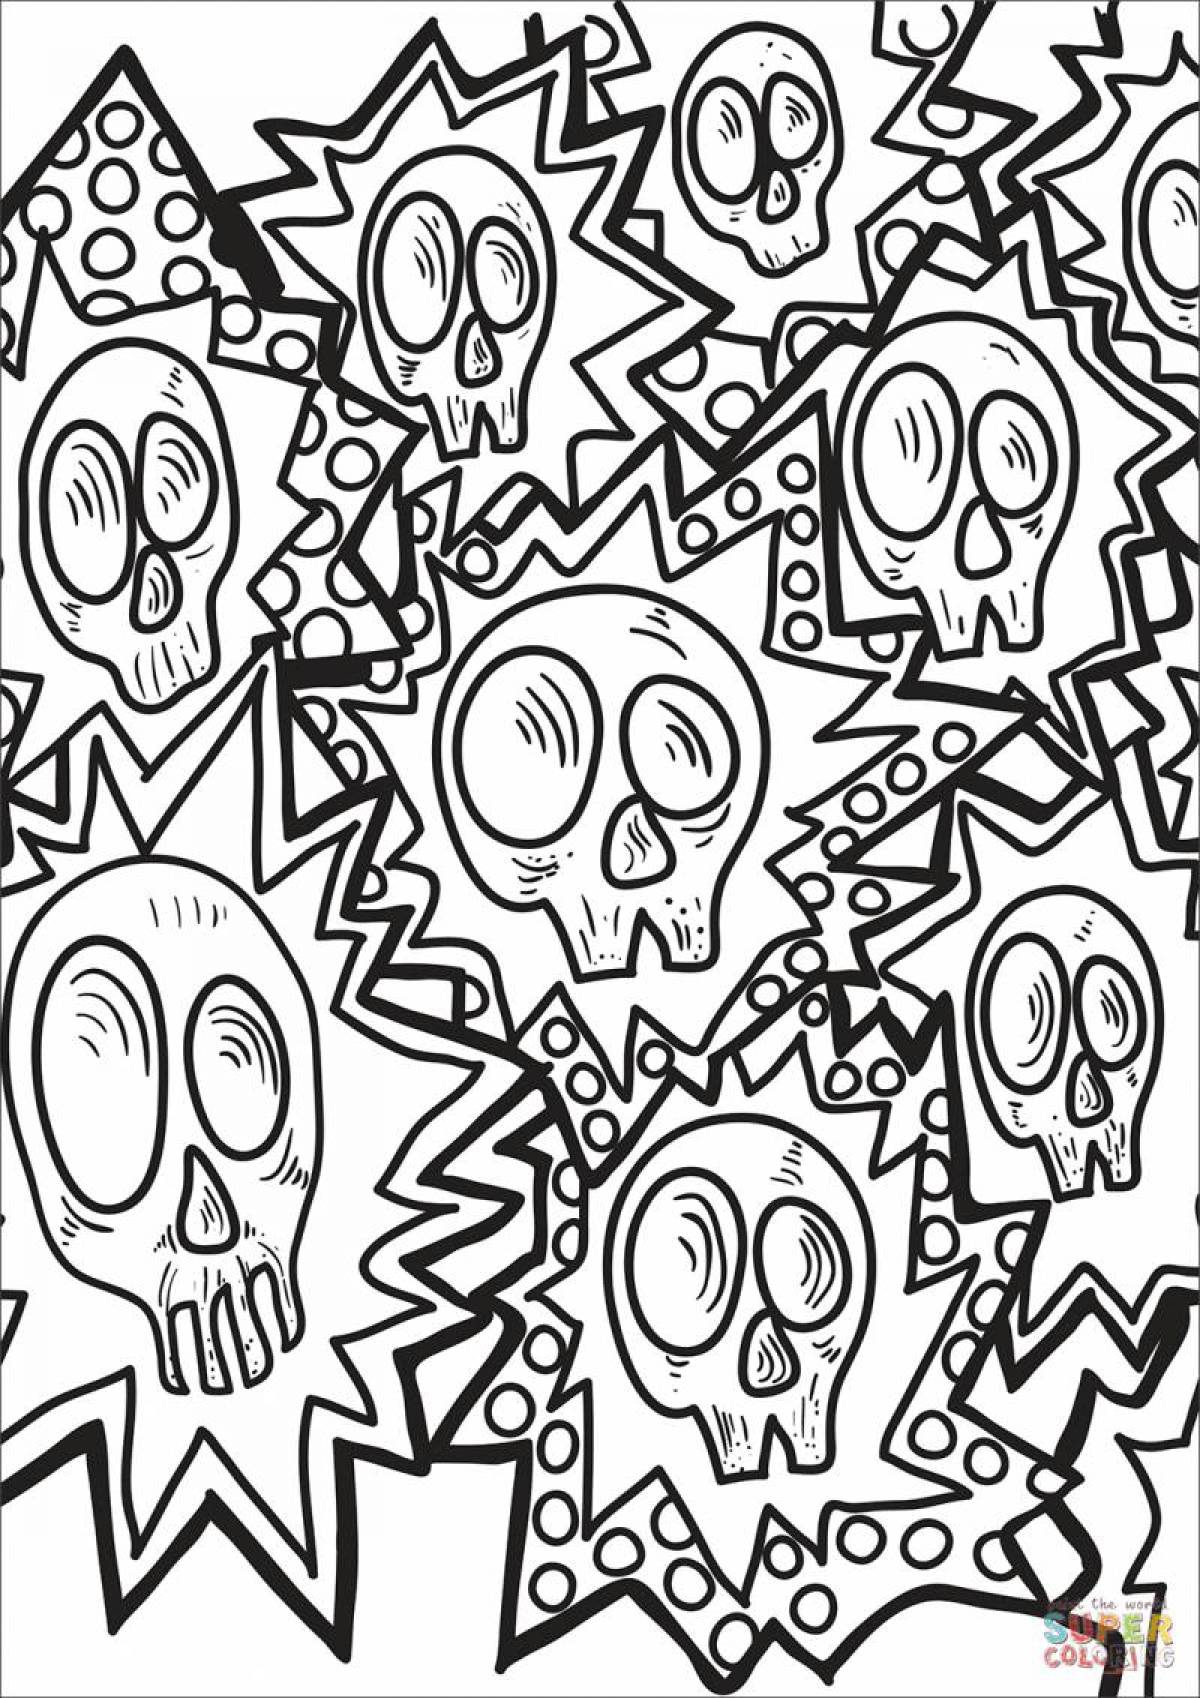 Coloring-illusionist coloring page wall indie kid